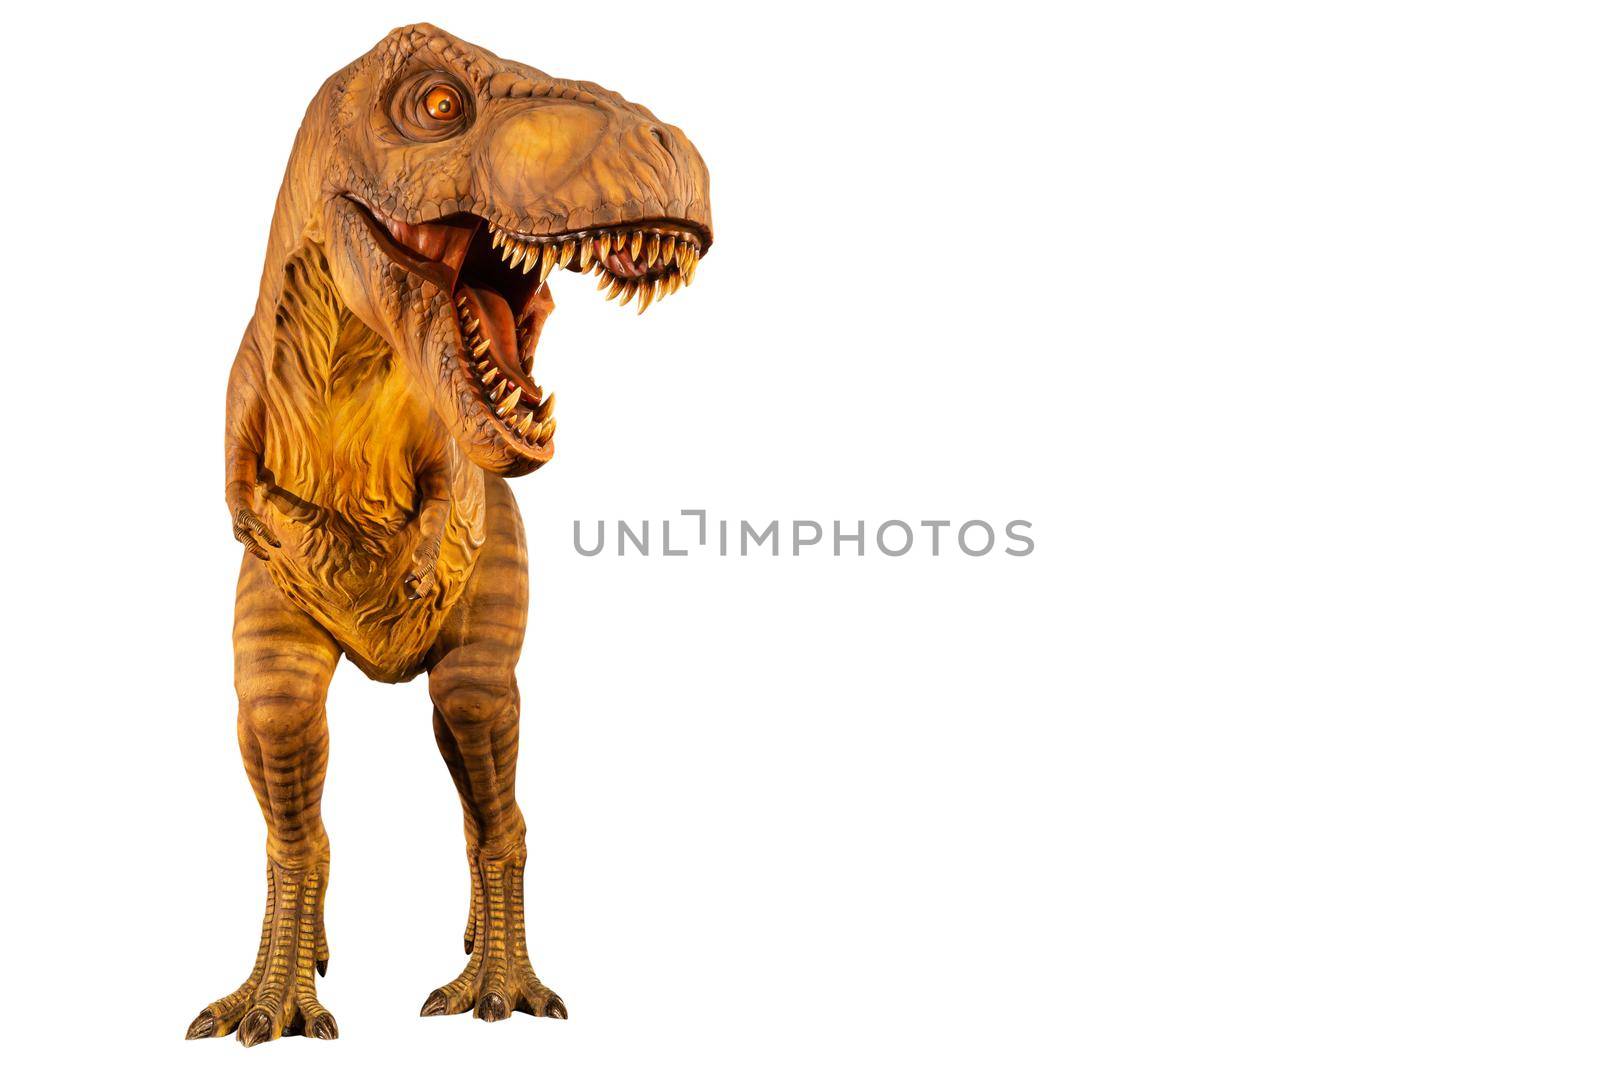 Tyrannosaurus rex ( T-rex ) is walking and open mouth and copy space on right site . Front view . White isolated background . Dinosaur in jurassic peroid . Embedded clipping paths . by stockdevil